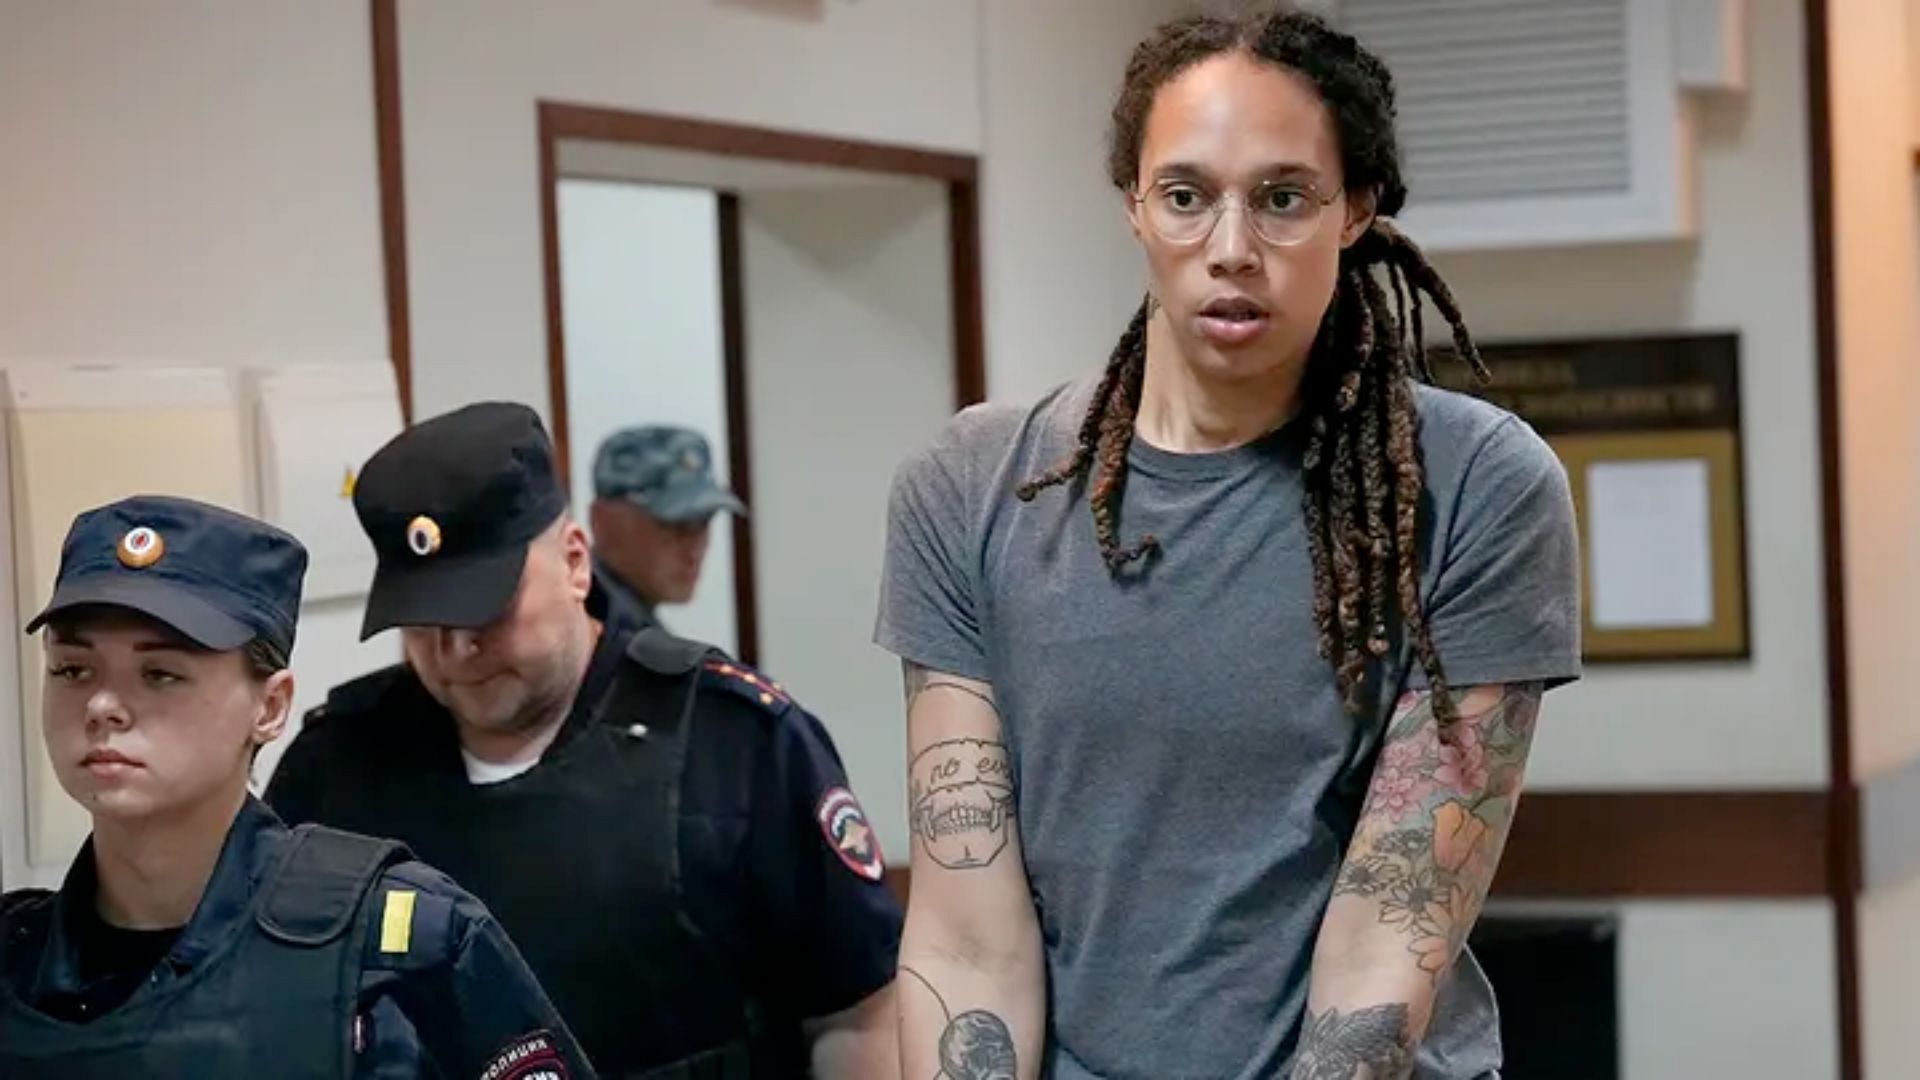 Griner being escorted after a hearing in Khimki just outside Moscow, Russia, Aug. 4, 2022. (image via Alexander Zemlianichenko)